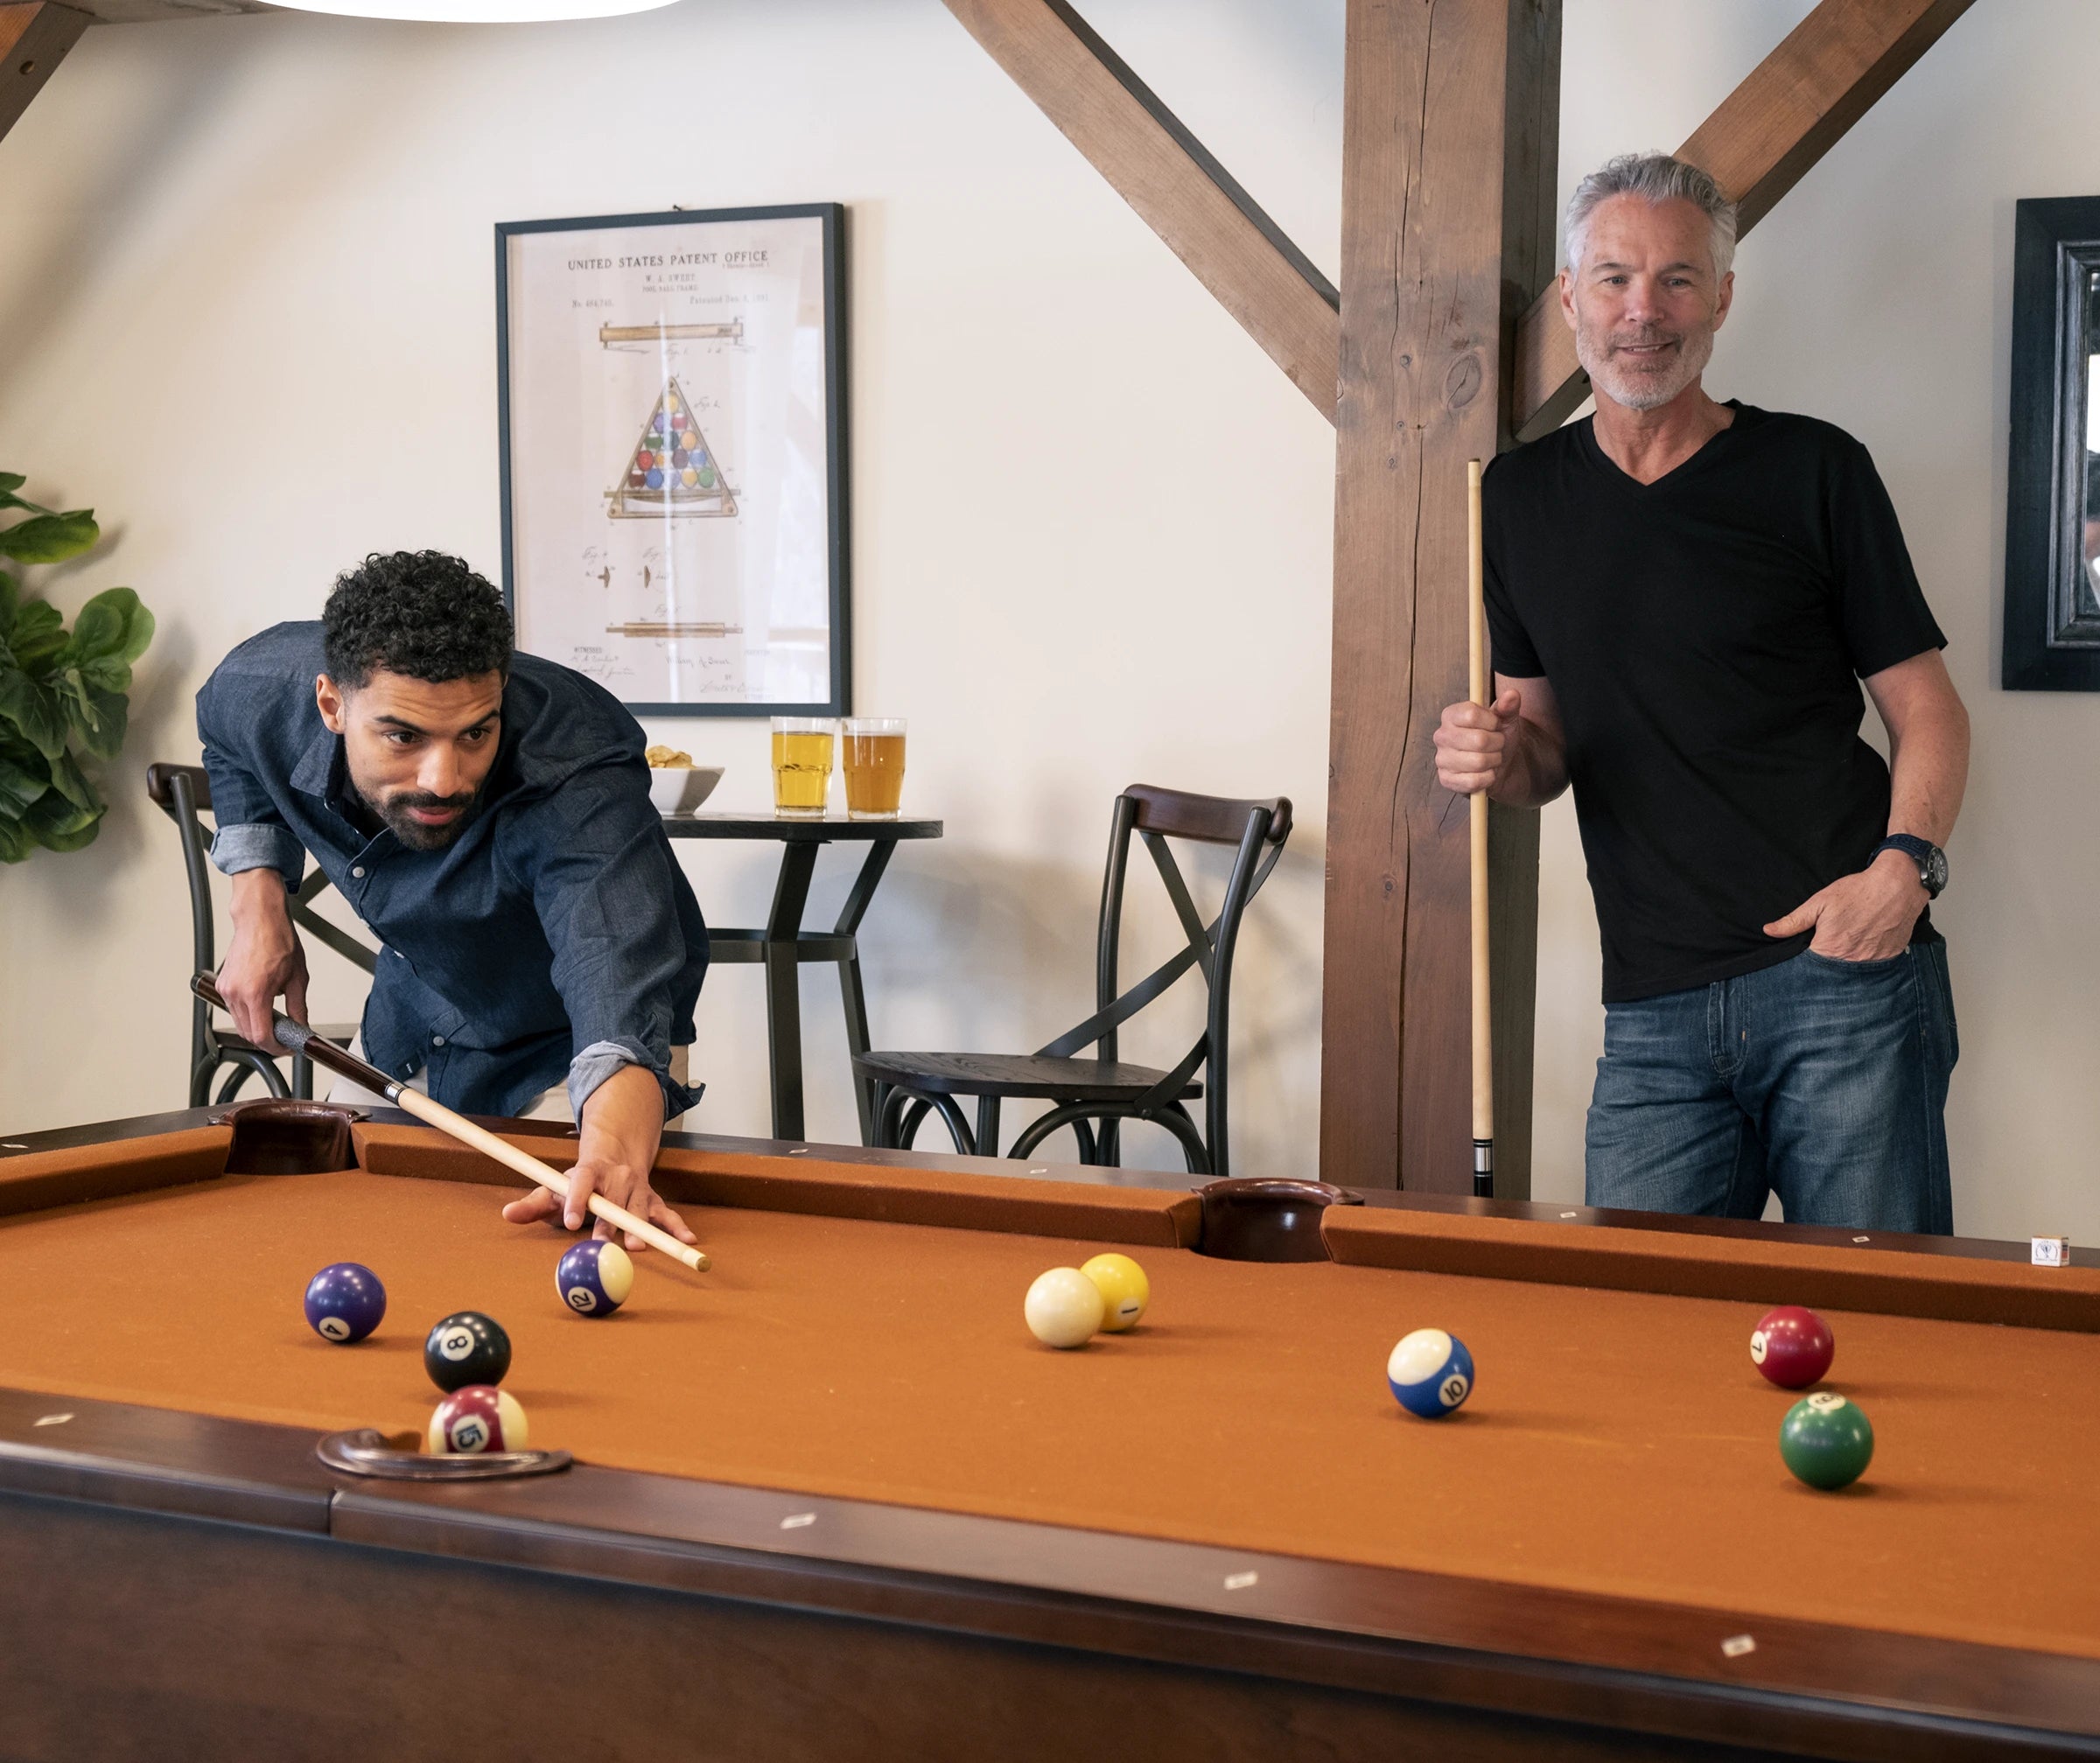 Two male models playing billiards